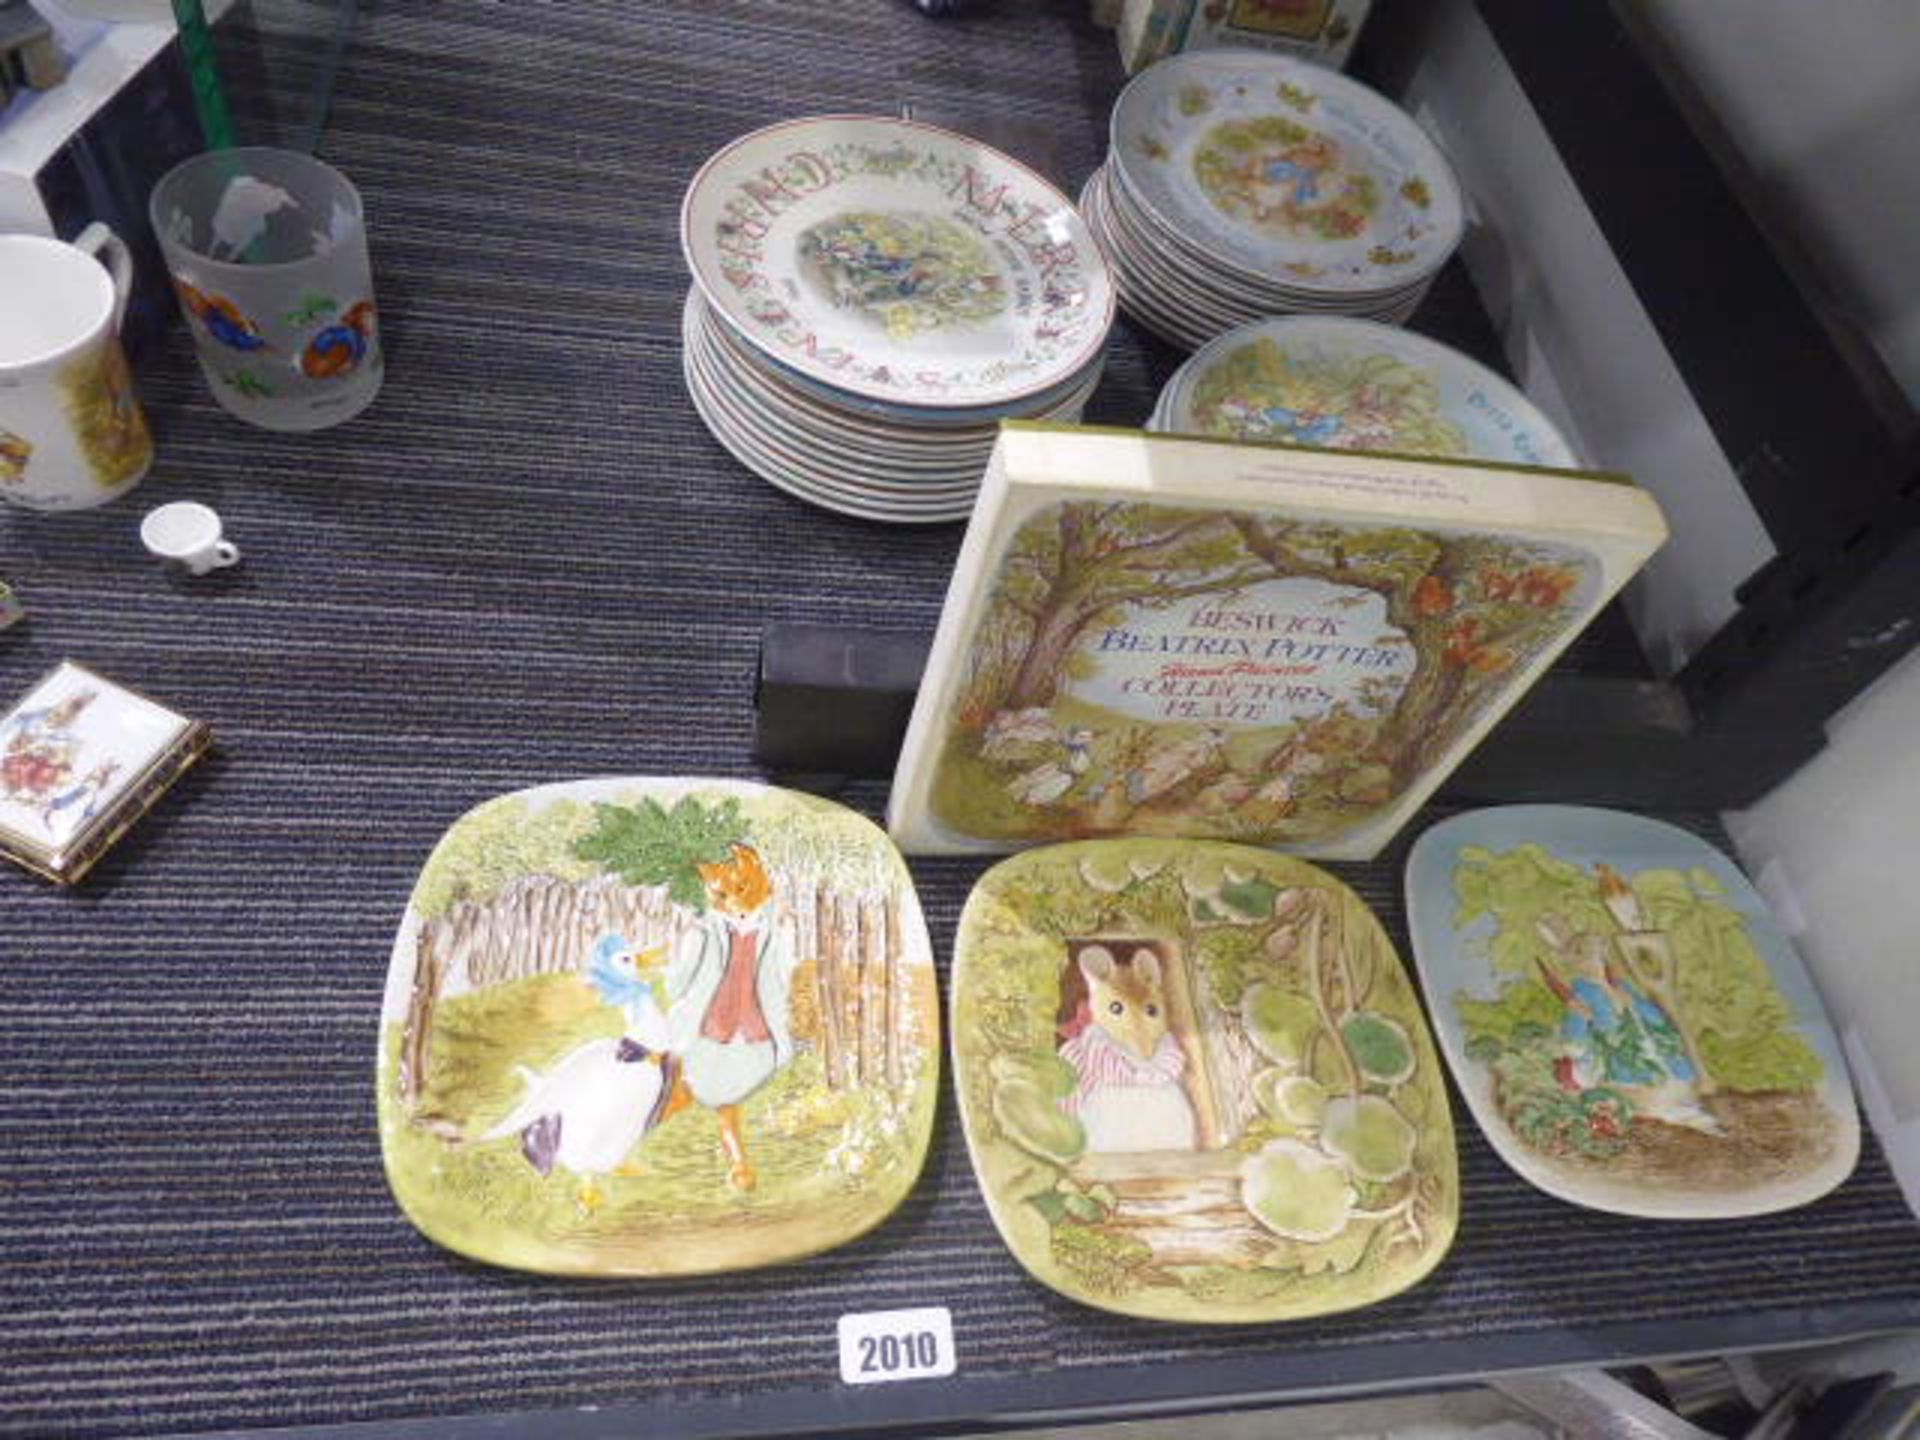 Large selection of Peter Rabbit themed and Beatrix Potter character themed Wedgwood and other